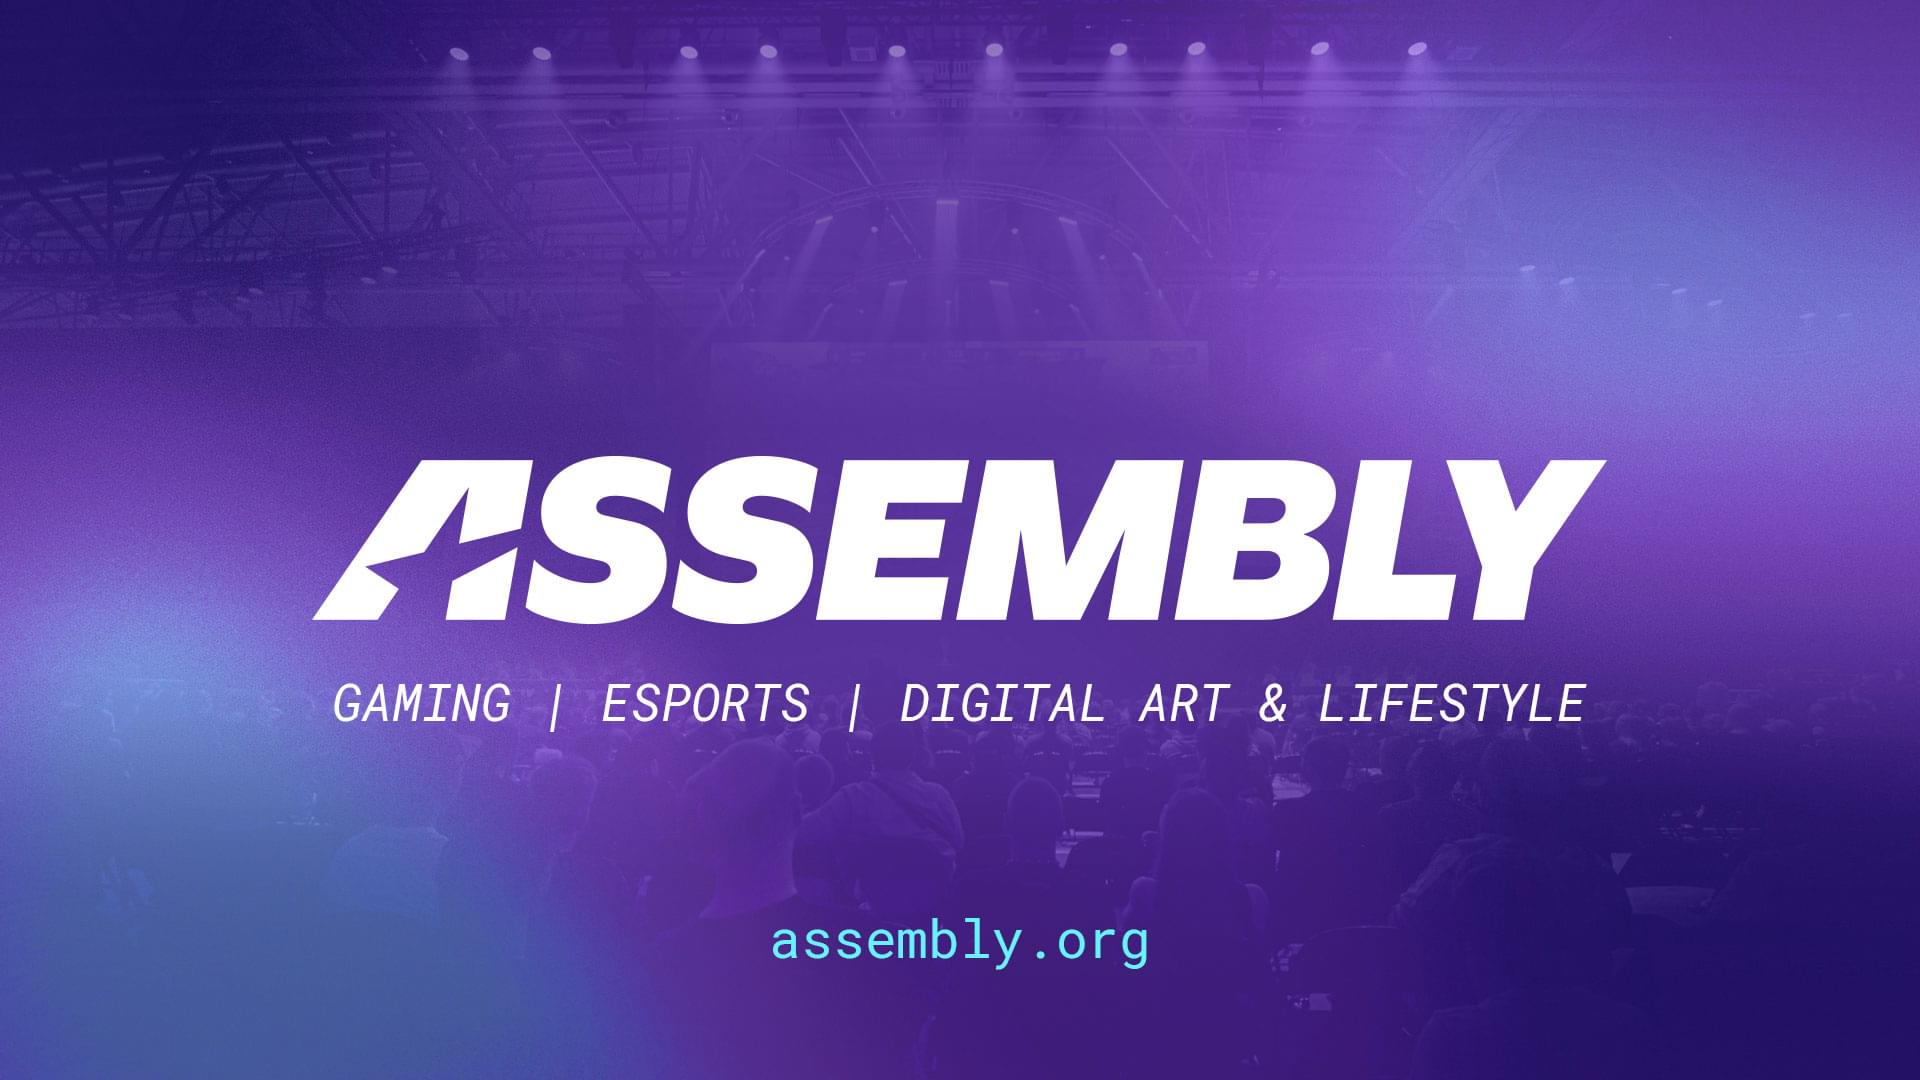 (c) Assembly.org